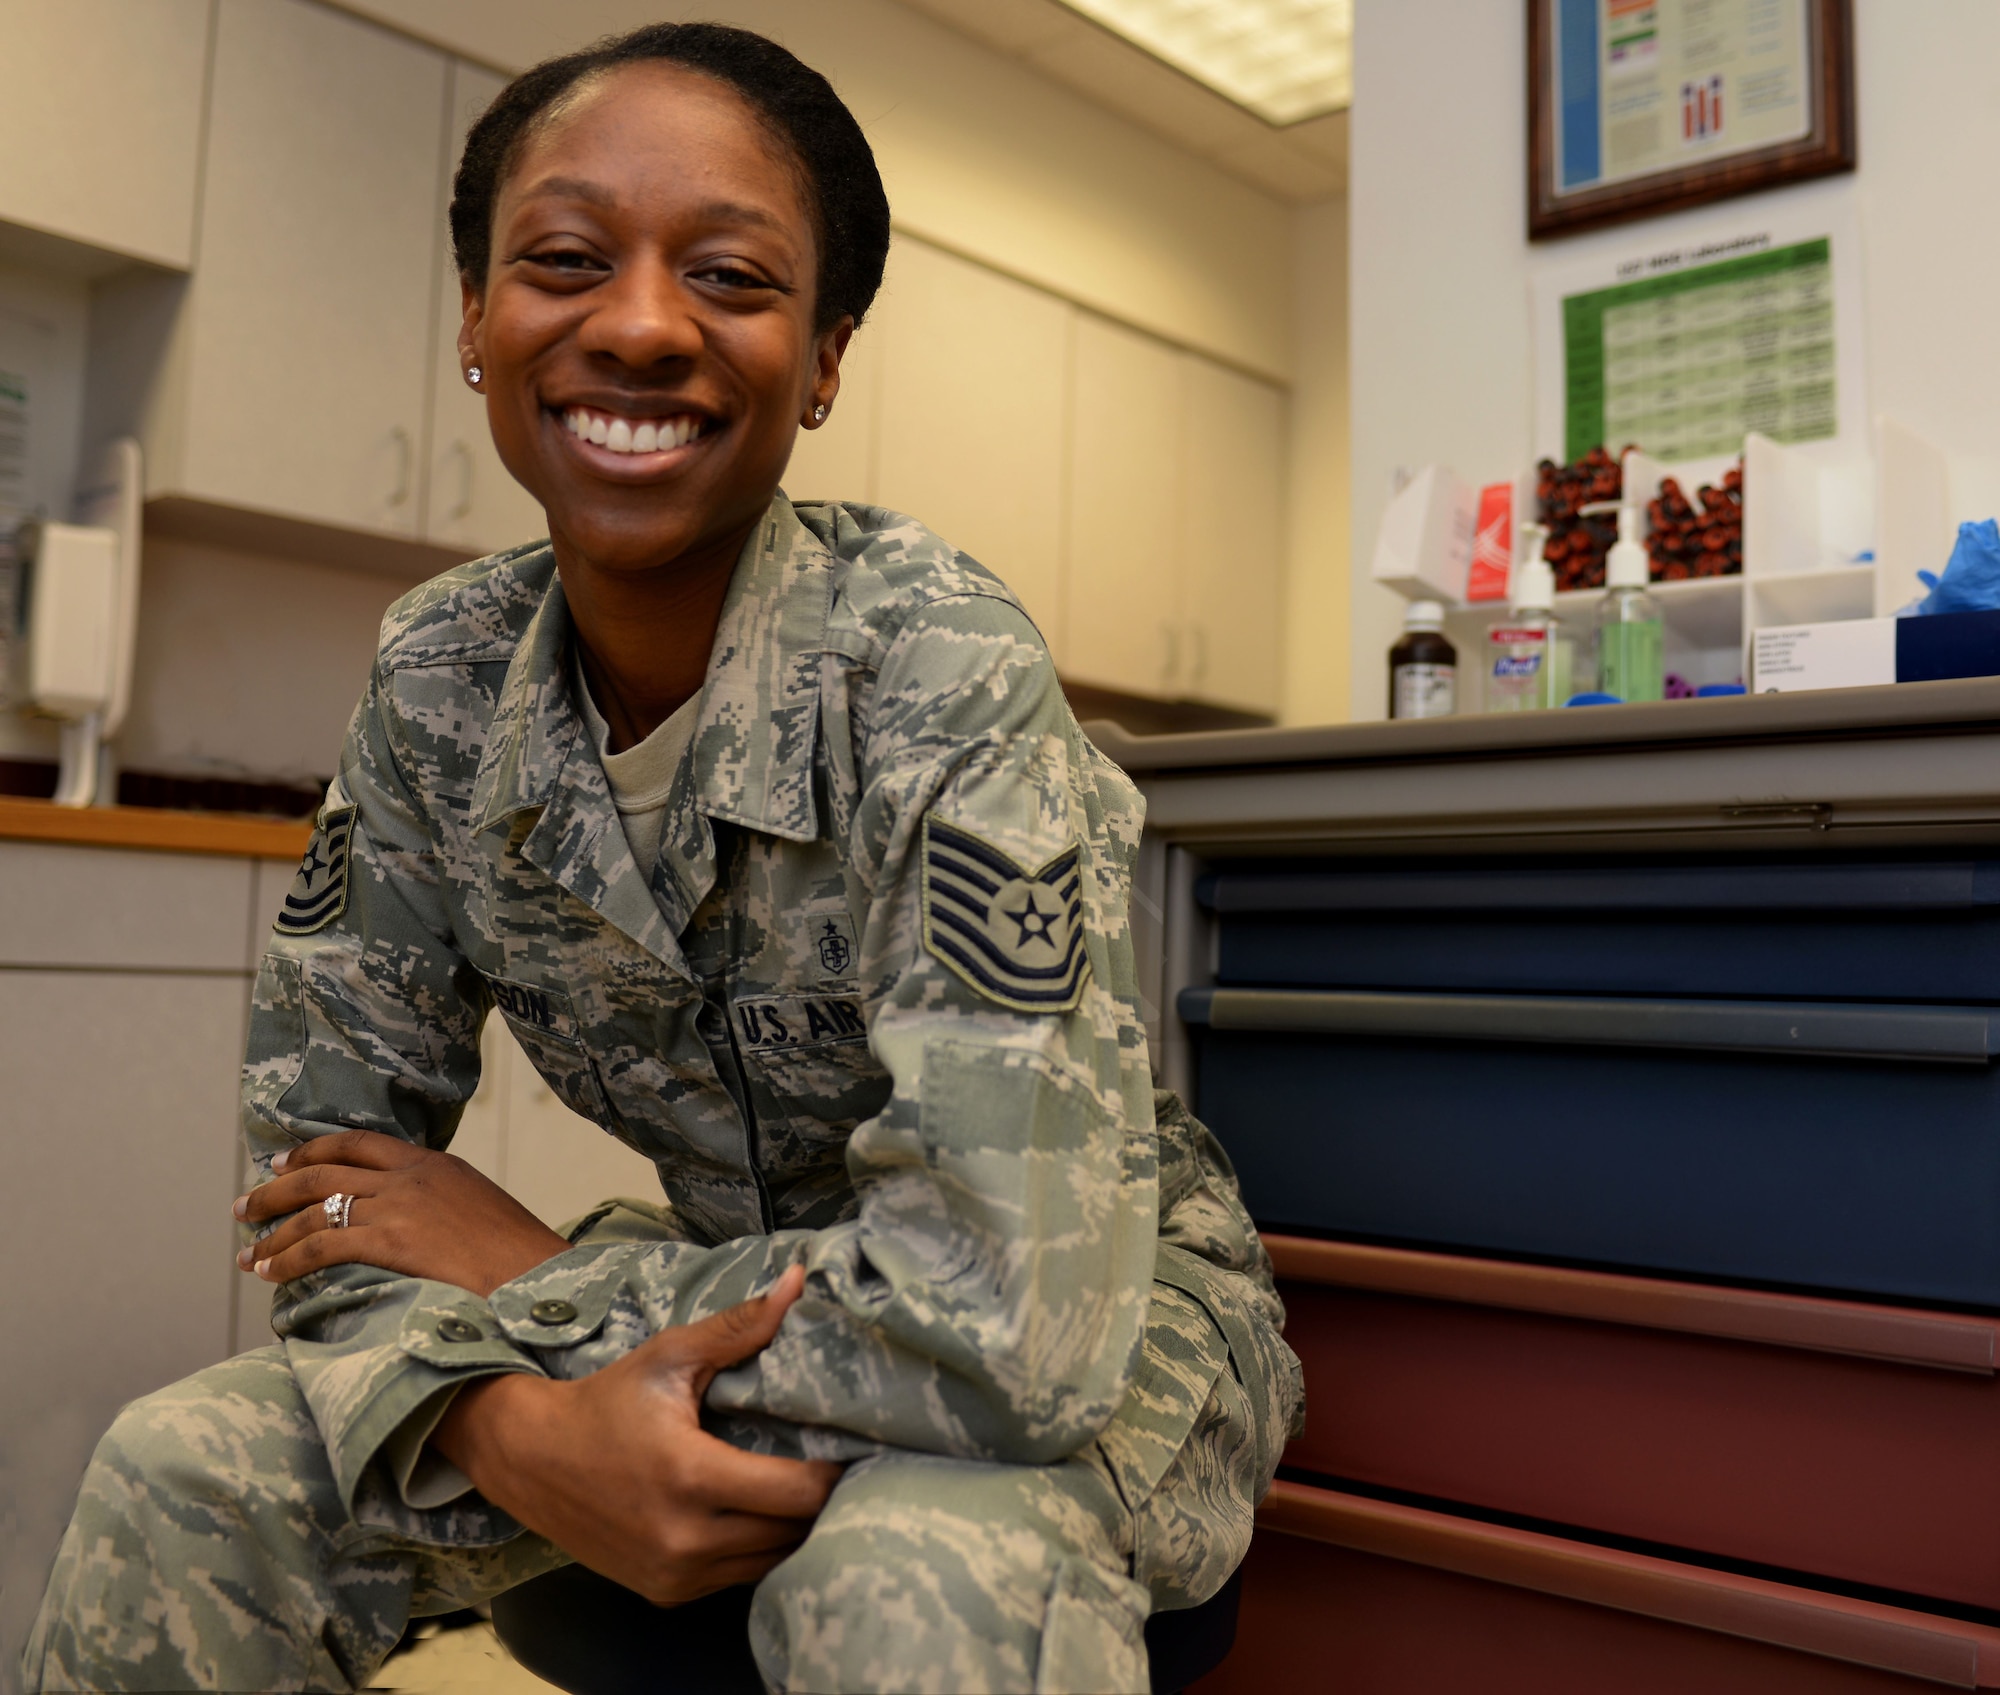 Tech. Sgt. Shanelle I. Sampson, the flight medical technician assigned to the 64th Air Refueling Squadron, poses for a portrait on Jan. 12, 2018, at Pease Air National Guard Base, N.H. Sampson was one of a select number of Airmen within the Air Mobility Command to receive a step promotion in 2017. (N.H. Air National Guard photo by Staff Sgt. Kayla Rorick)